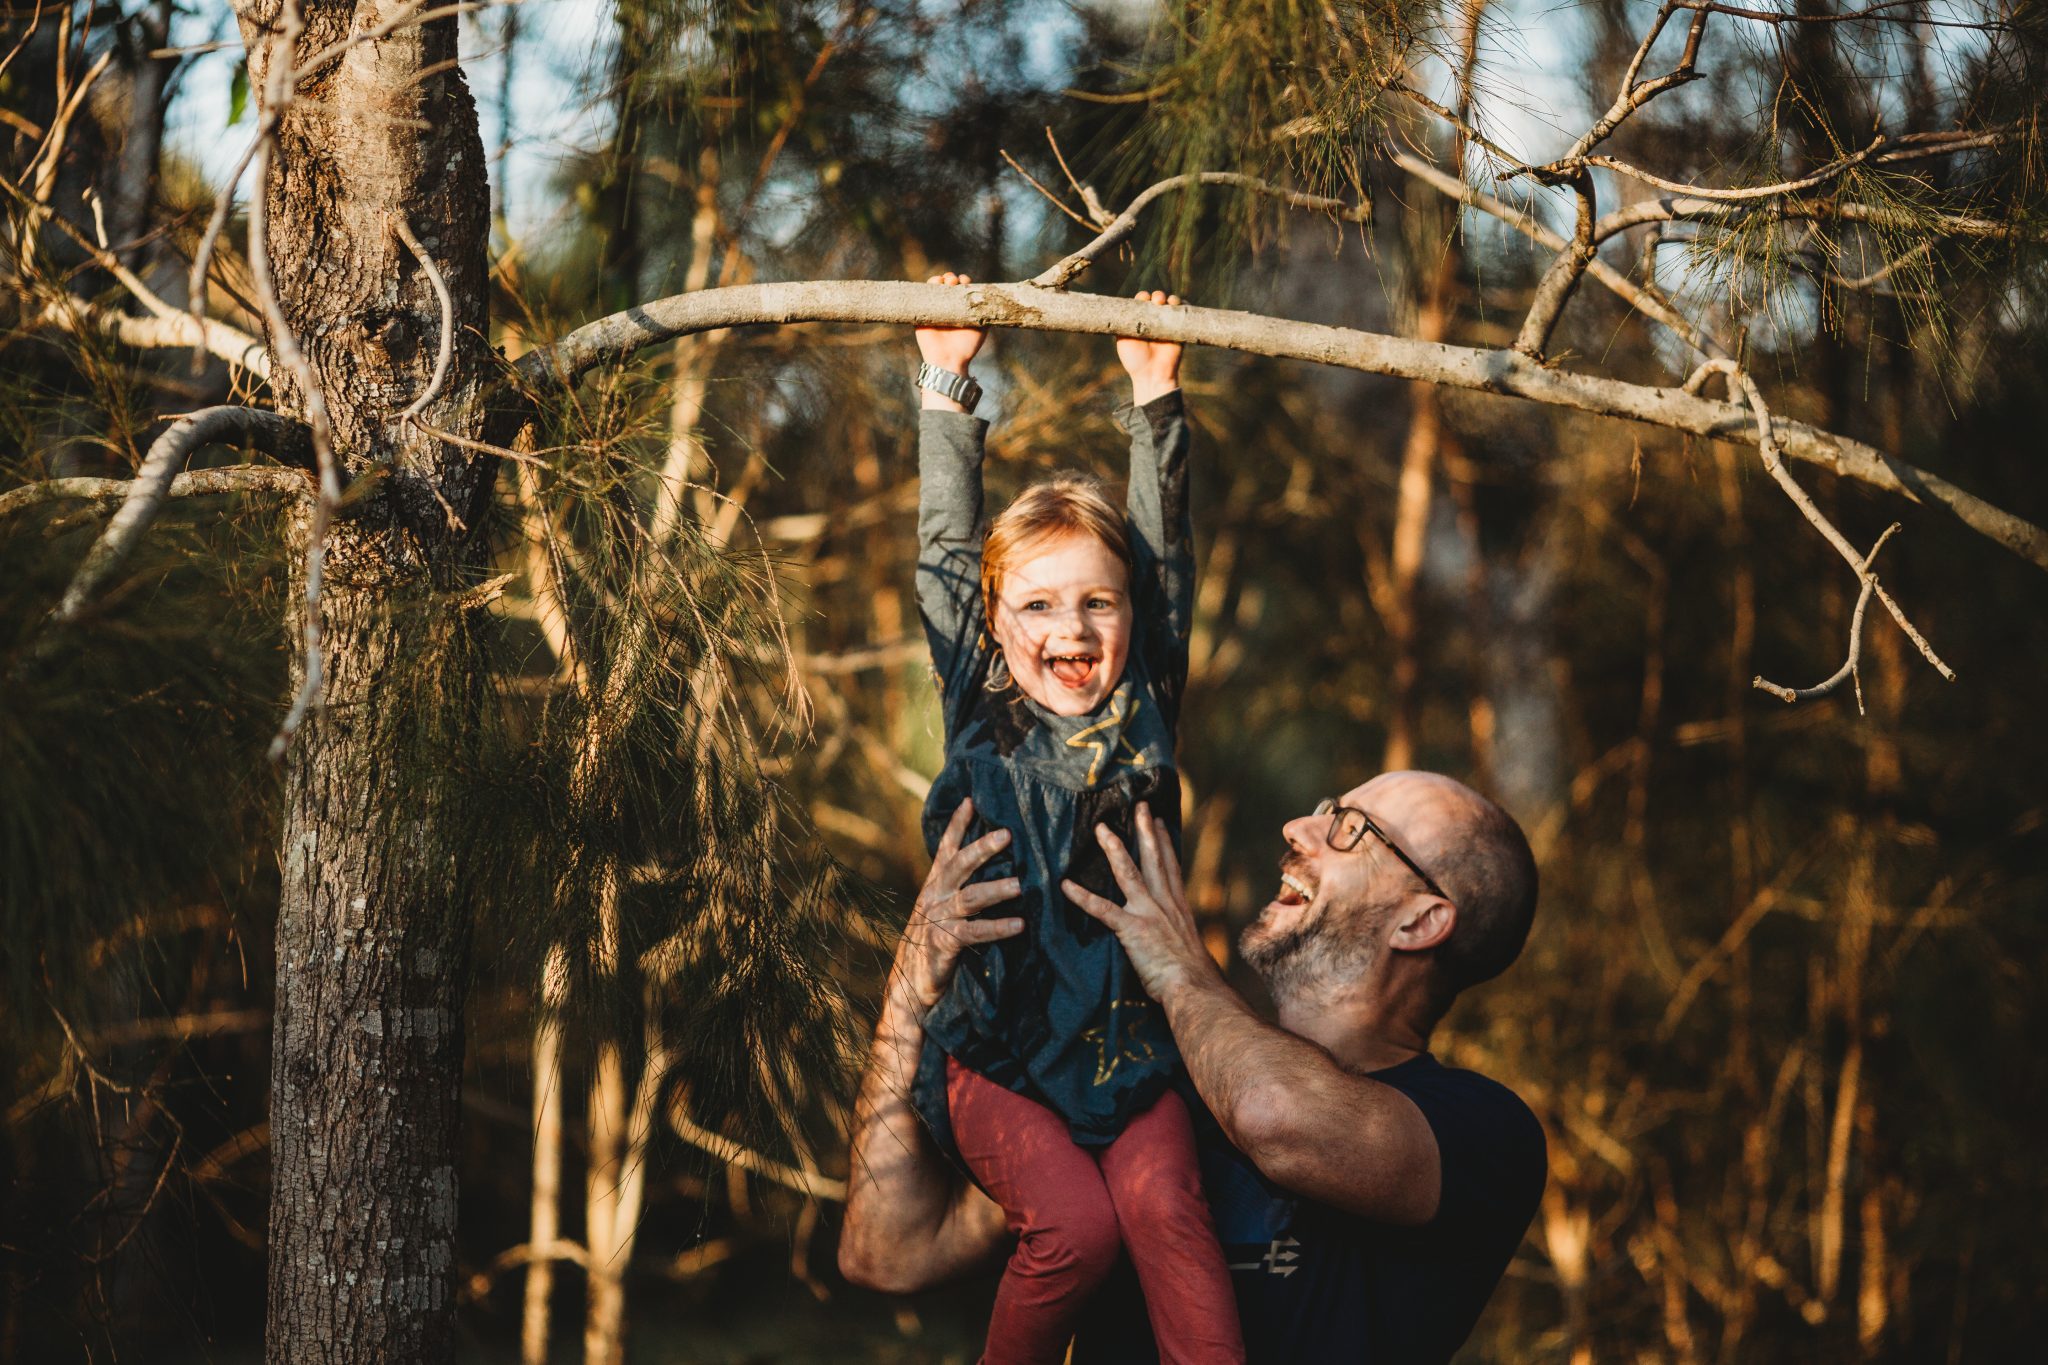 Young girl smiling while hanging off tree branch while her father holds her up